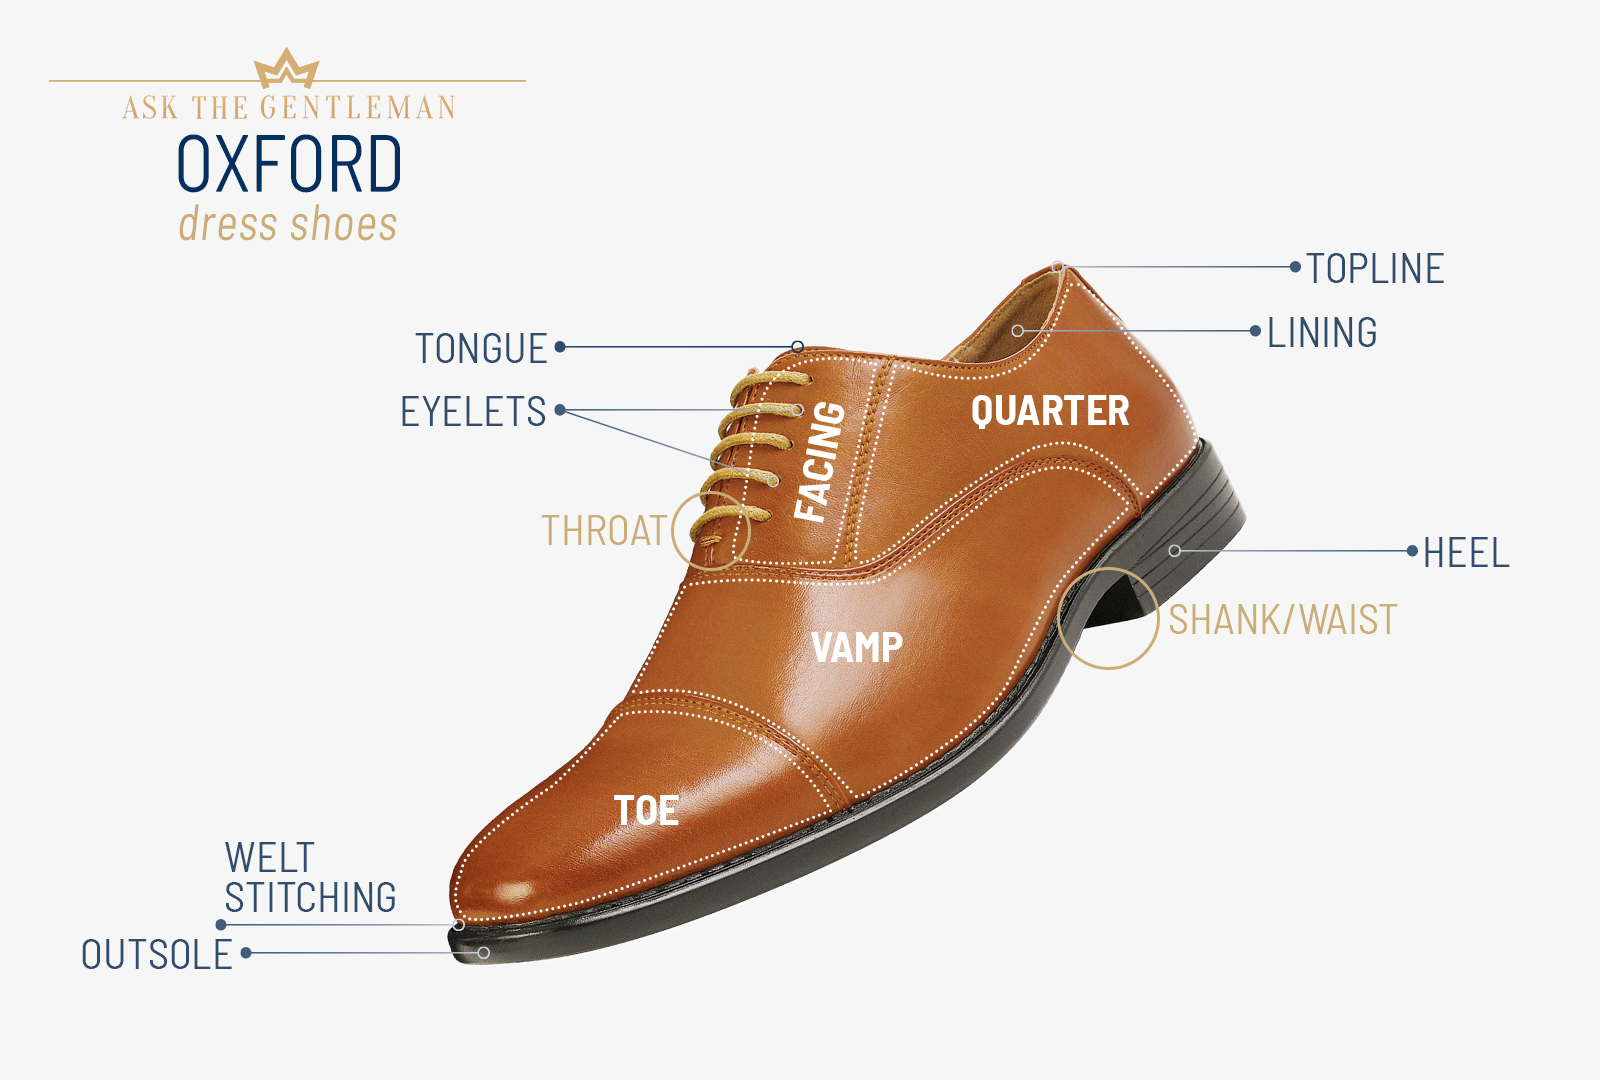 What are Oxford dress shoes?